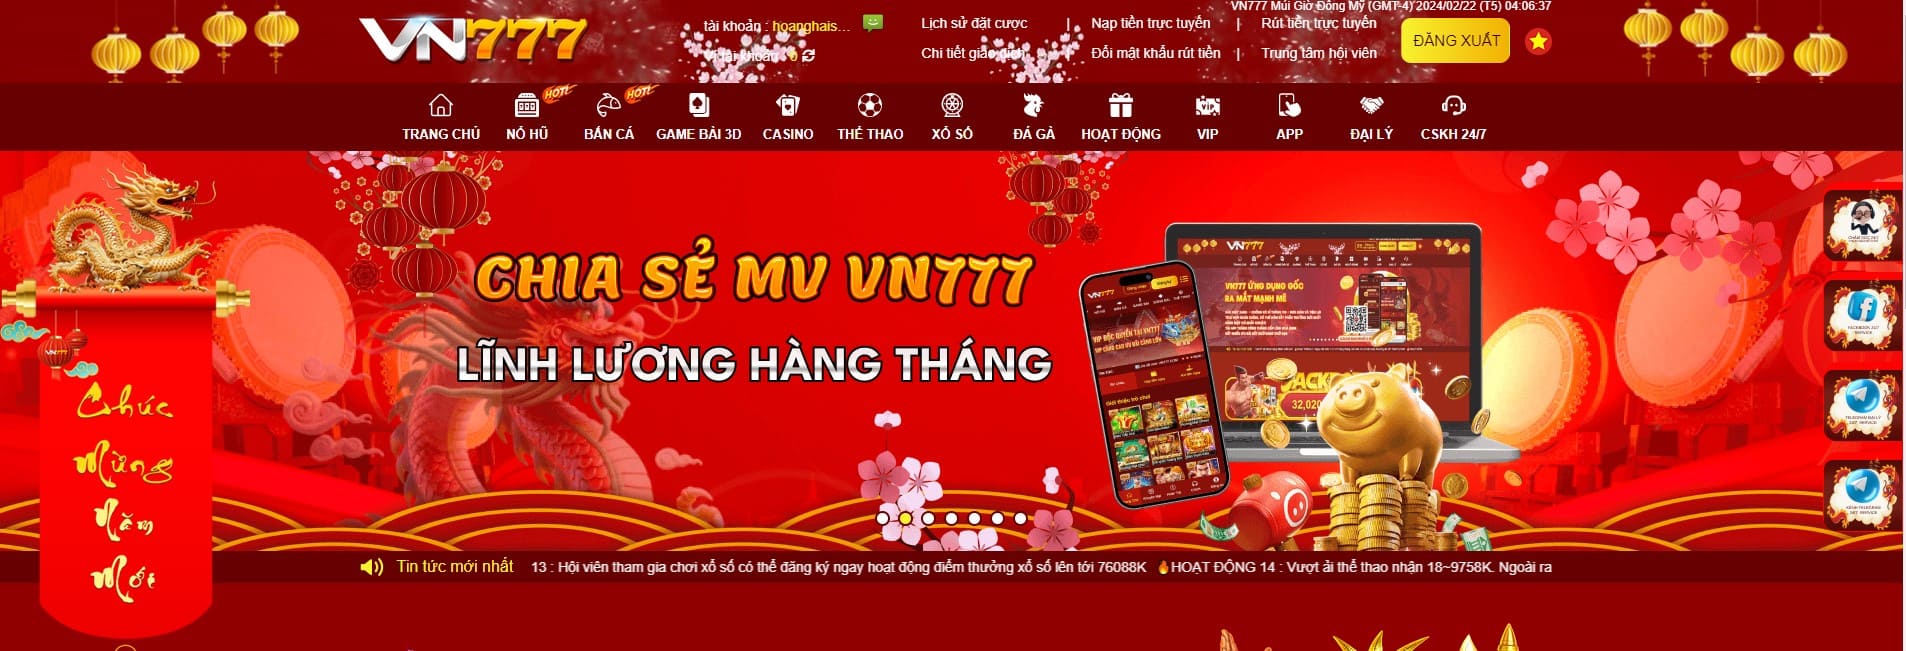 vn777p ca cuoc dang cap link vn777pcom chinh ch